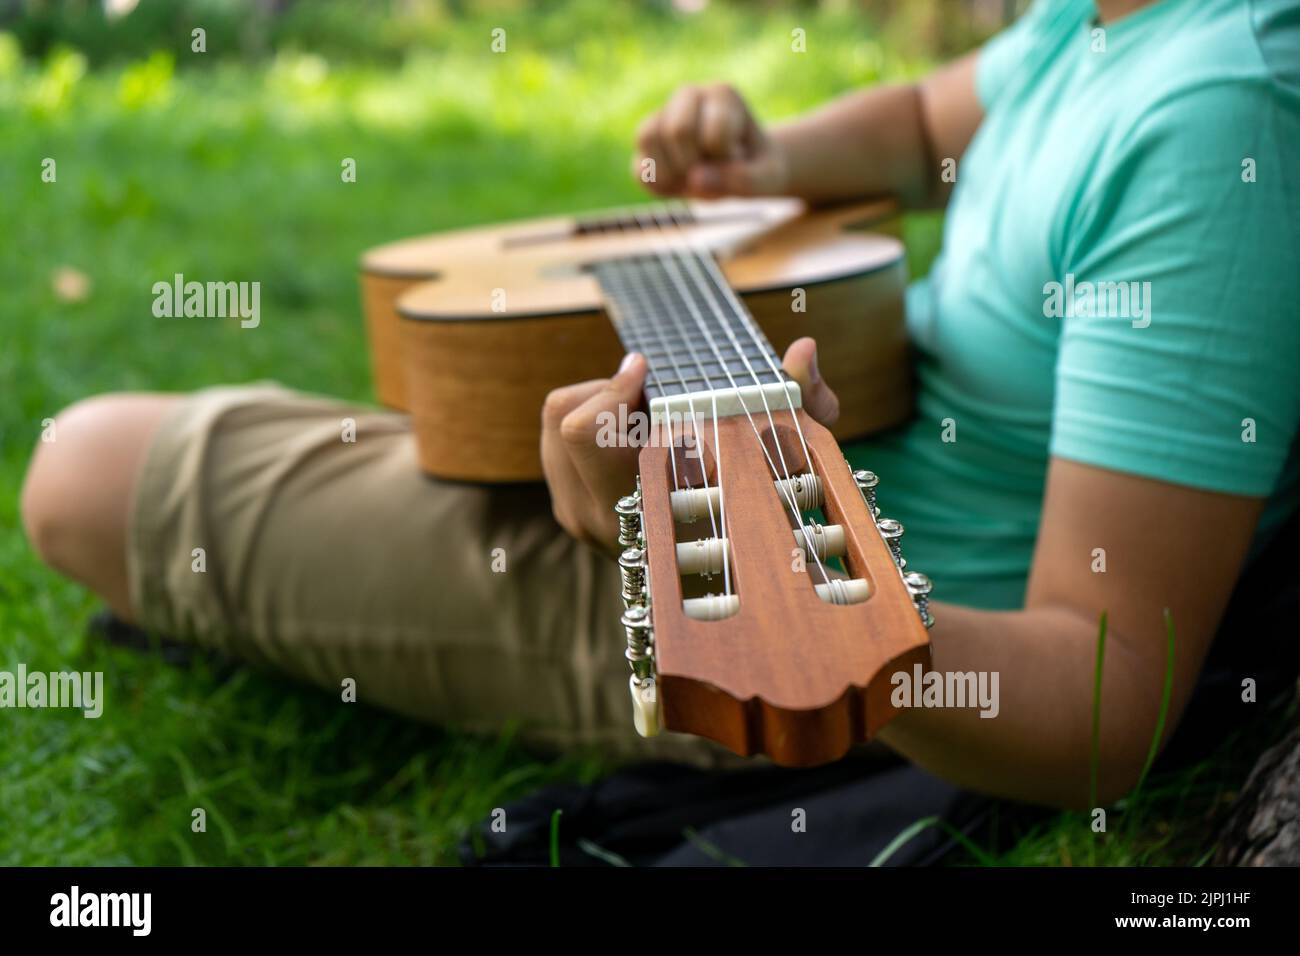 Boy with wooden guitar on green grass. Focus on the fretboard Stock Photo